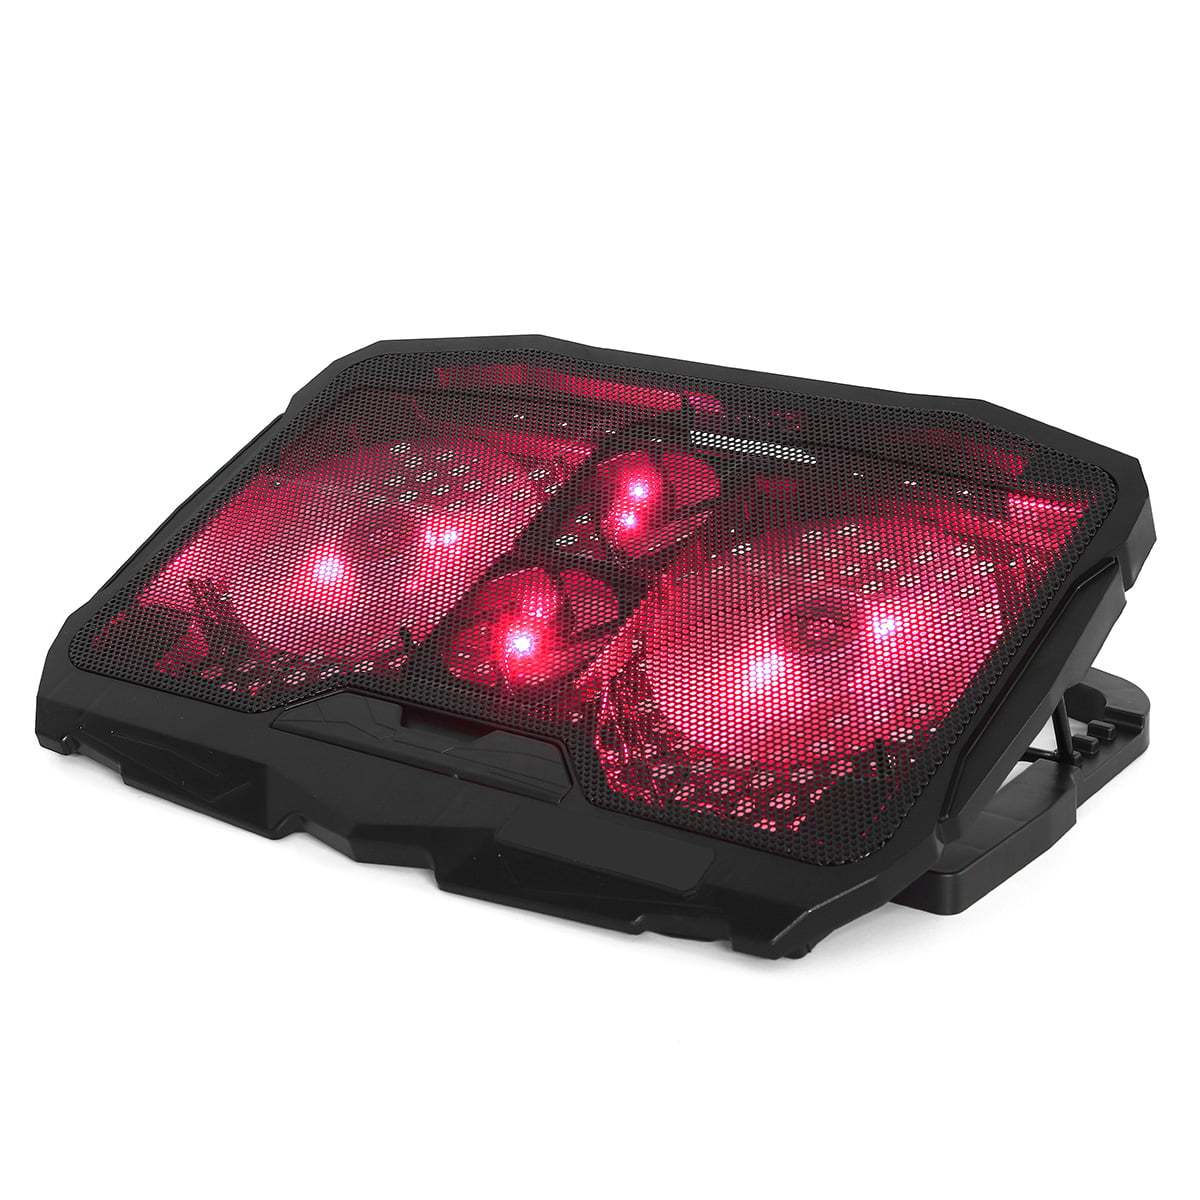 ILYO Portable Red Light Laptop Cooling Pad Dual USB Port Adjustable Bracket Height 4 Cooling Fans for 12-17 Computer 